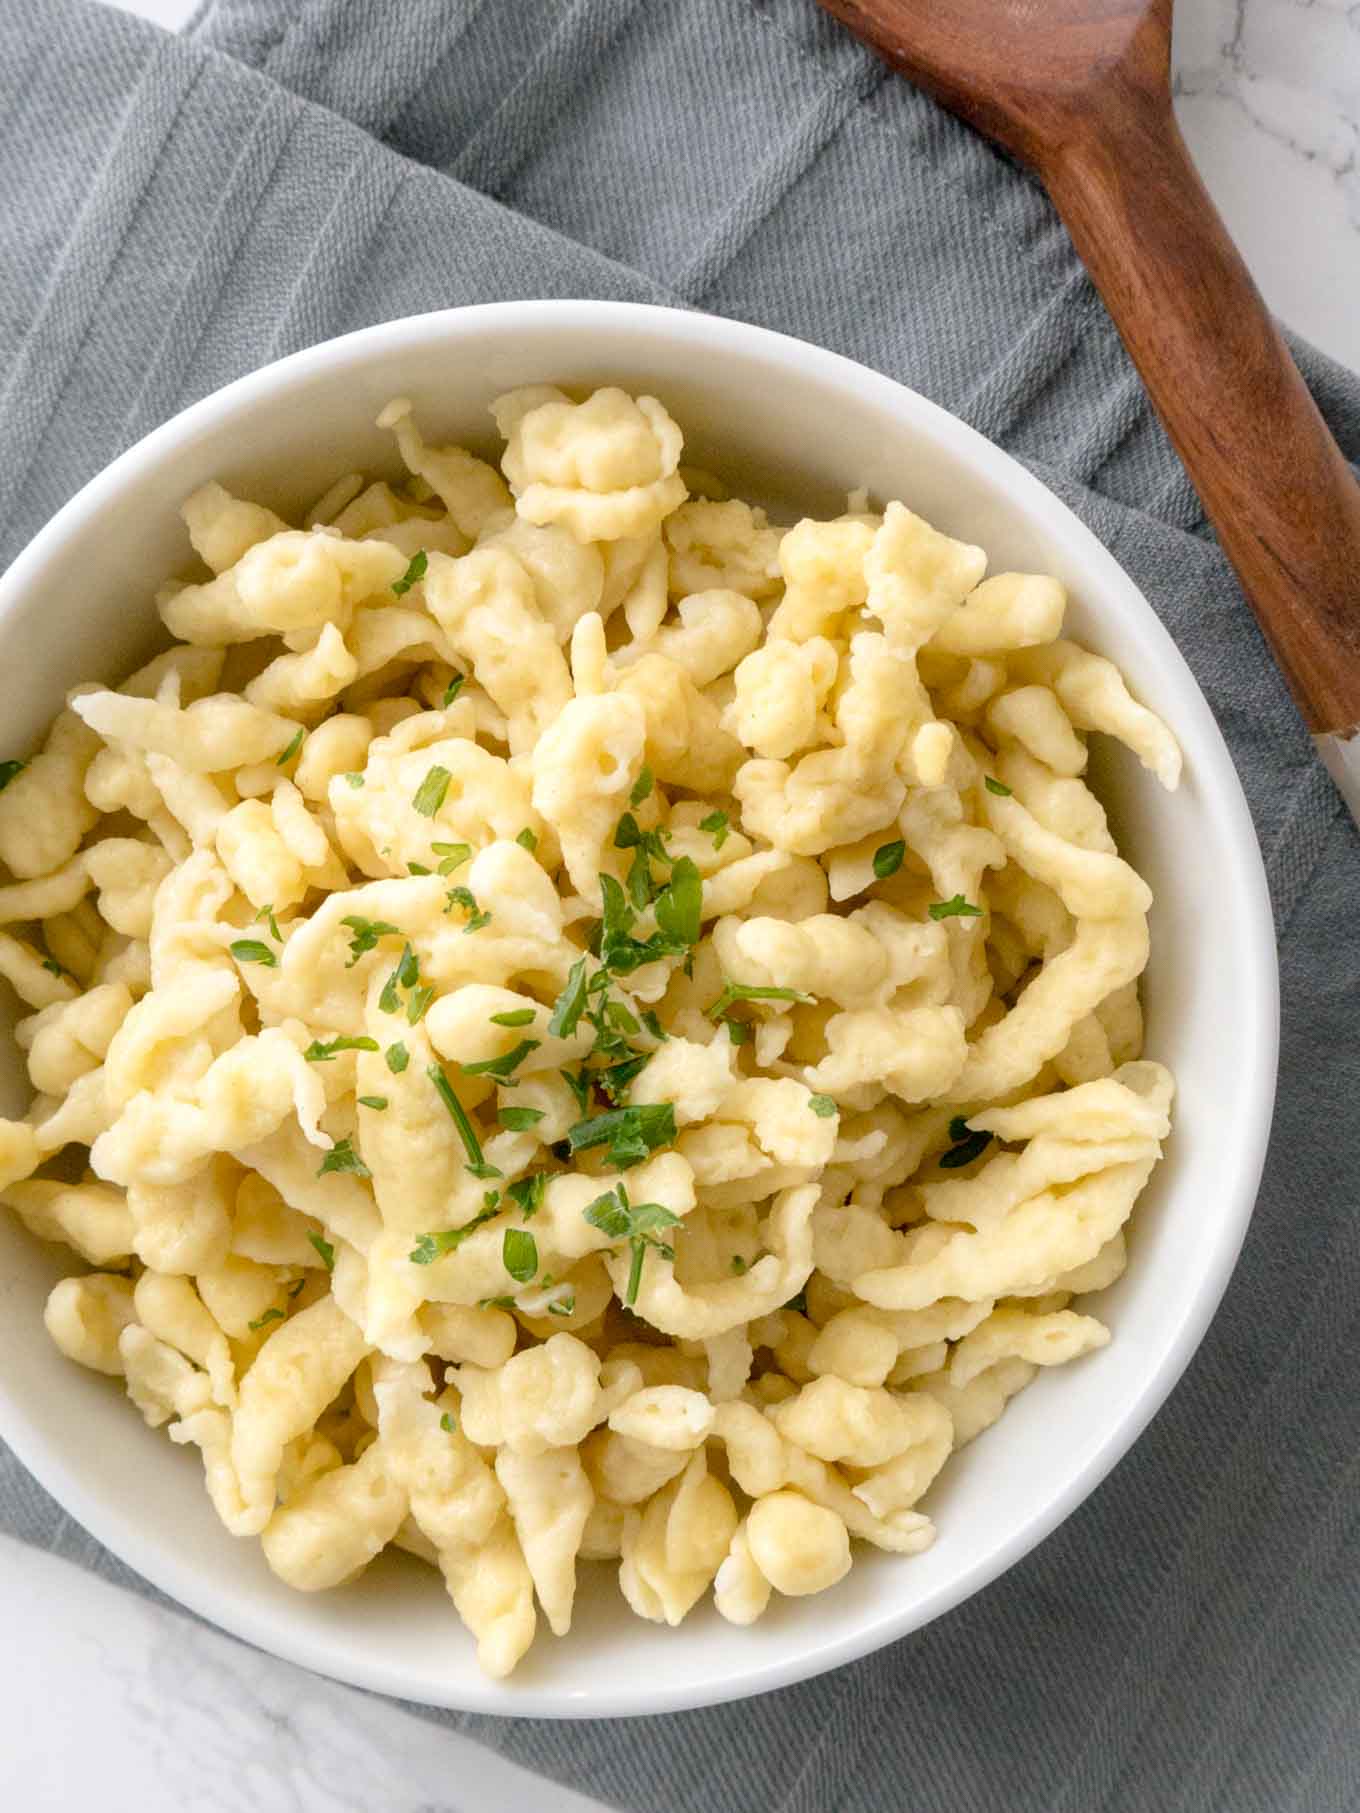 Spaetzle Is the Most Forgiving Pasta—Or Is It a Dumpling?—to Make